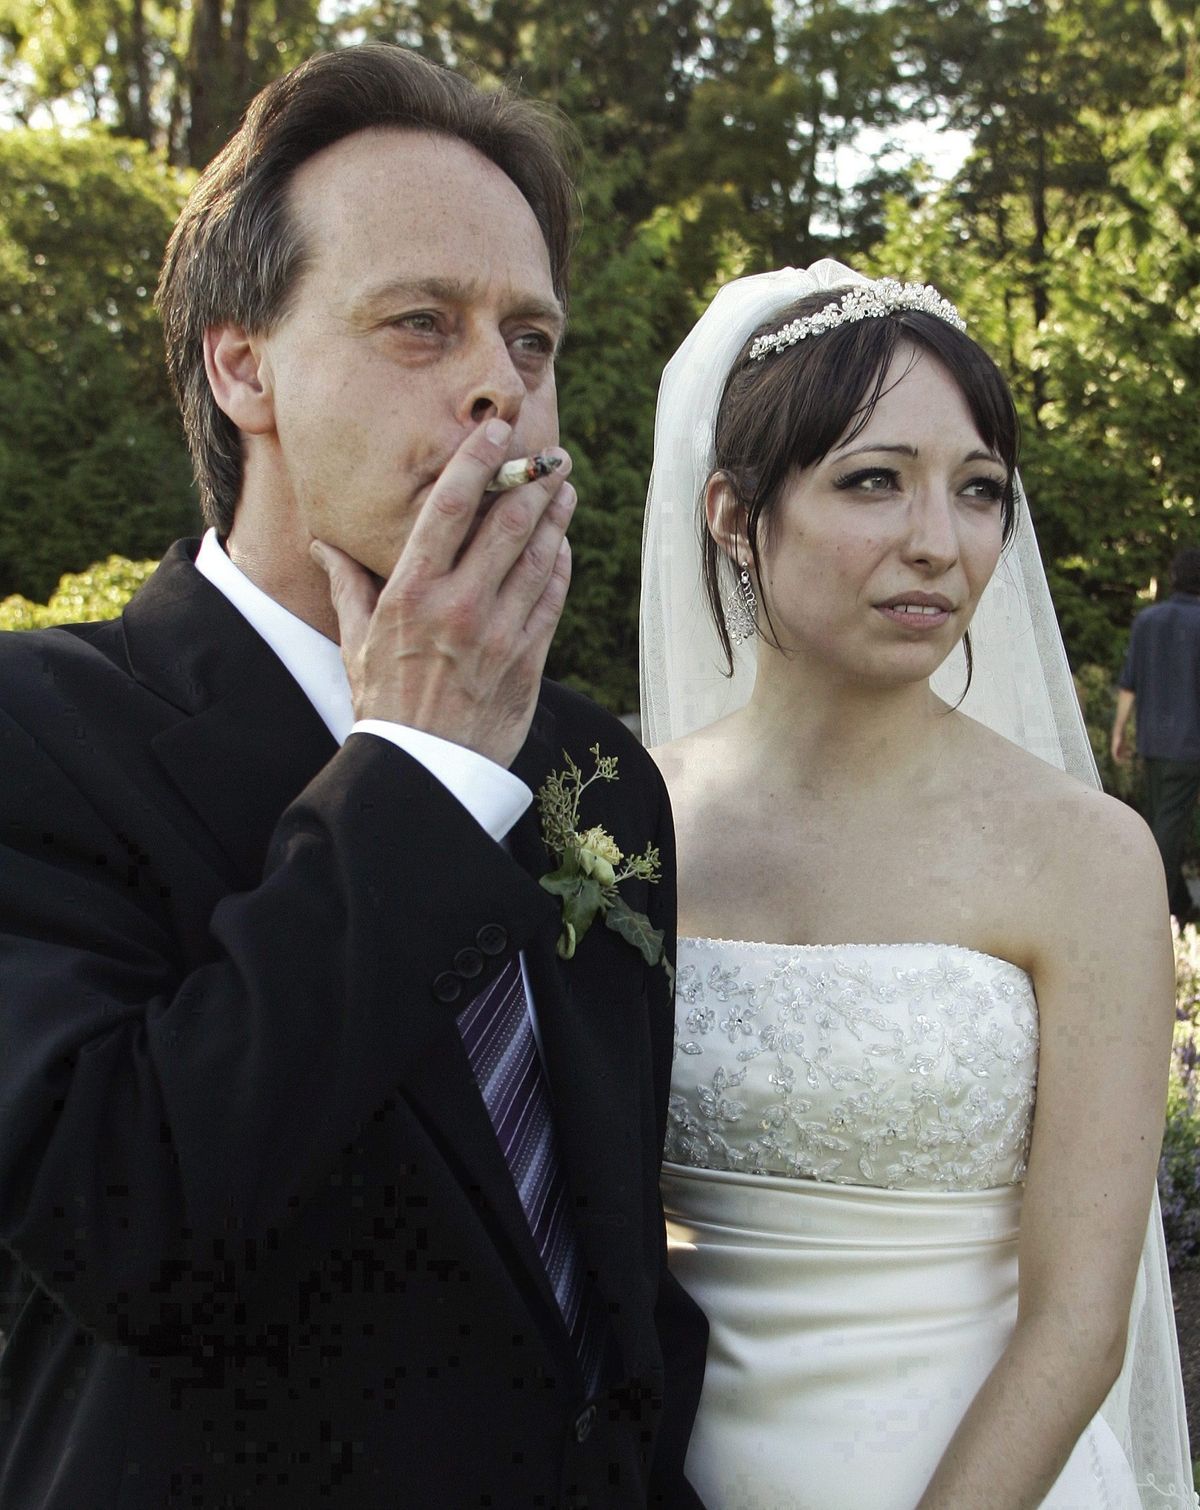 Marc Emery, Canada’s so-called Prince of Pot, smokes a marijuana cigarette at his marriage to his wife, Jodie, in Vancouver, B.C., on July 23, 2006.  (Associated Press / The Spokesman-Review)